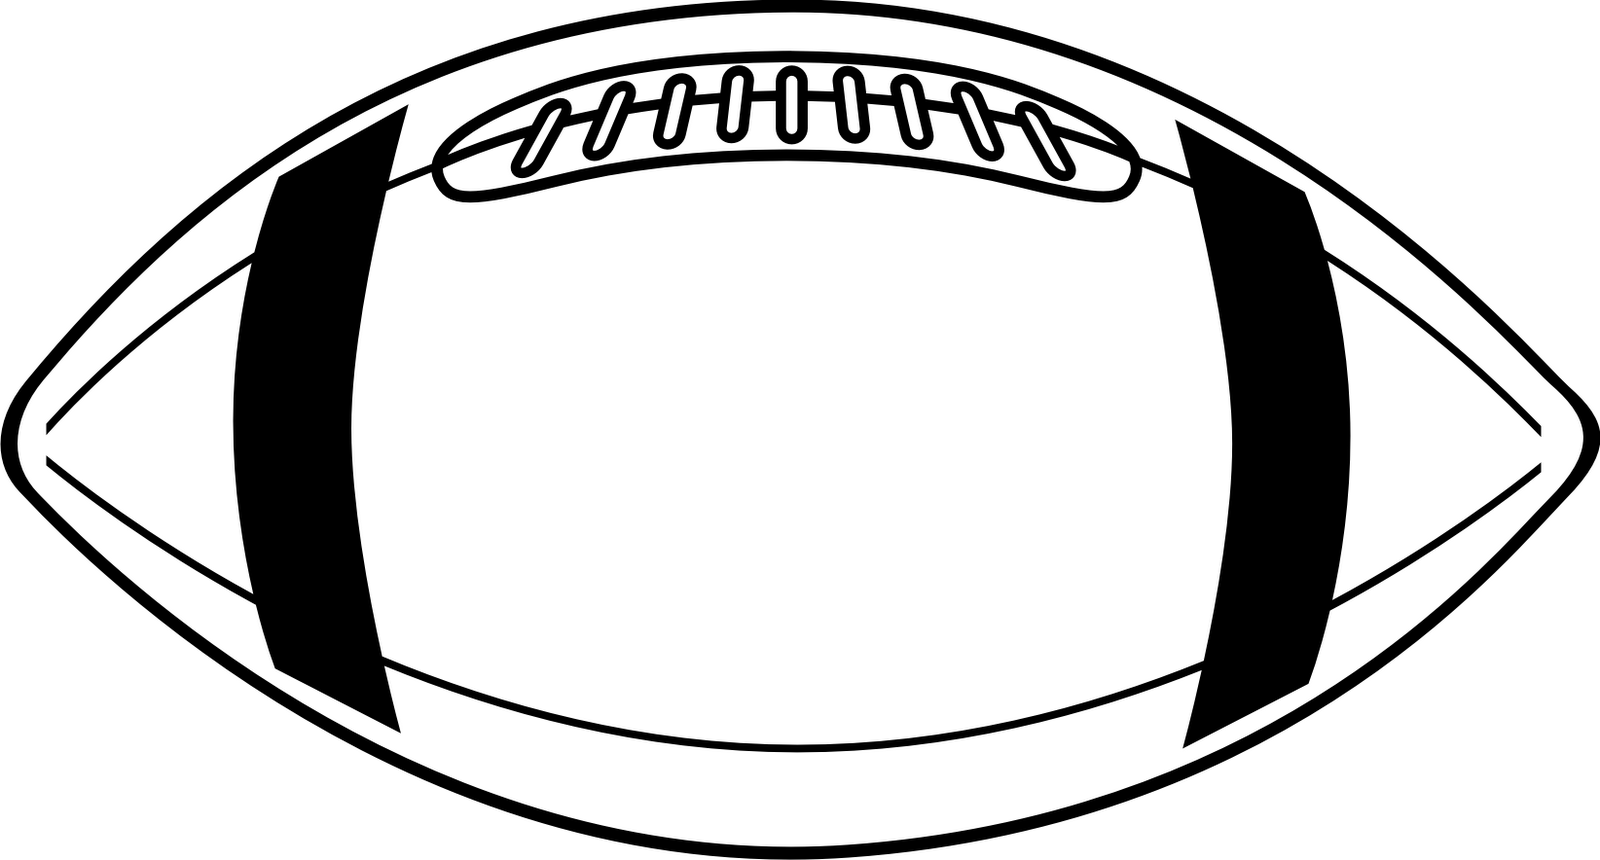 Football field clipart black and white free 2